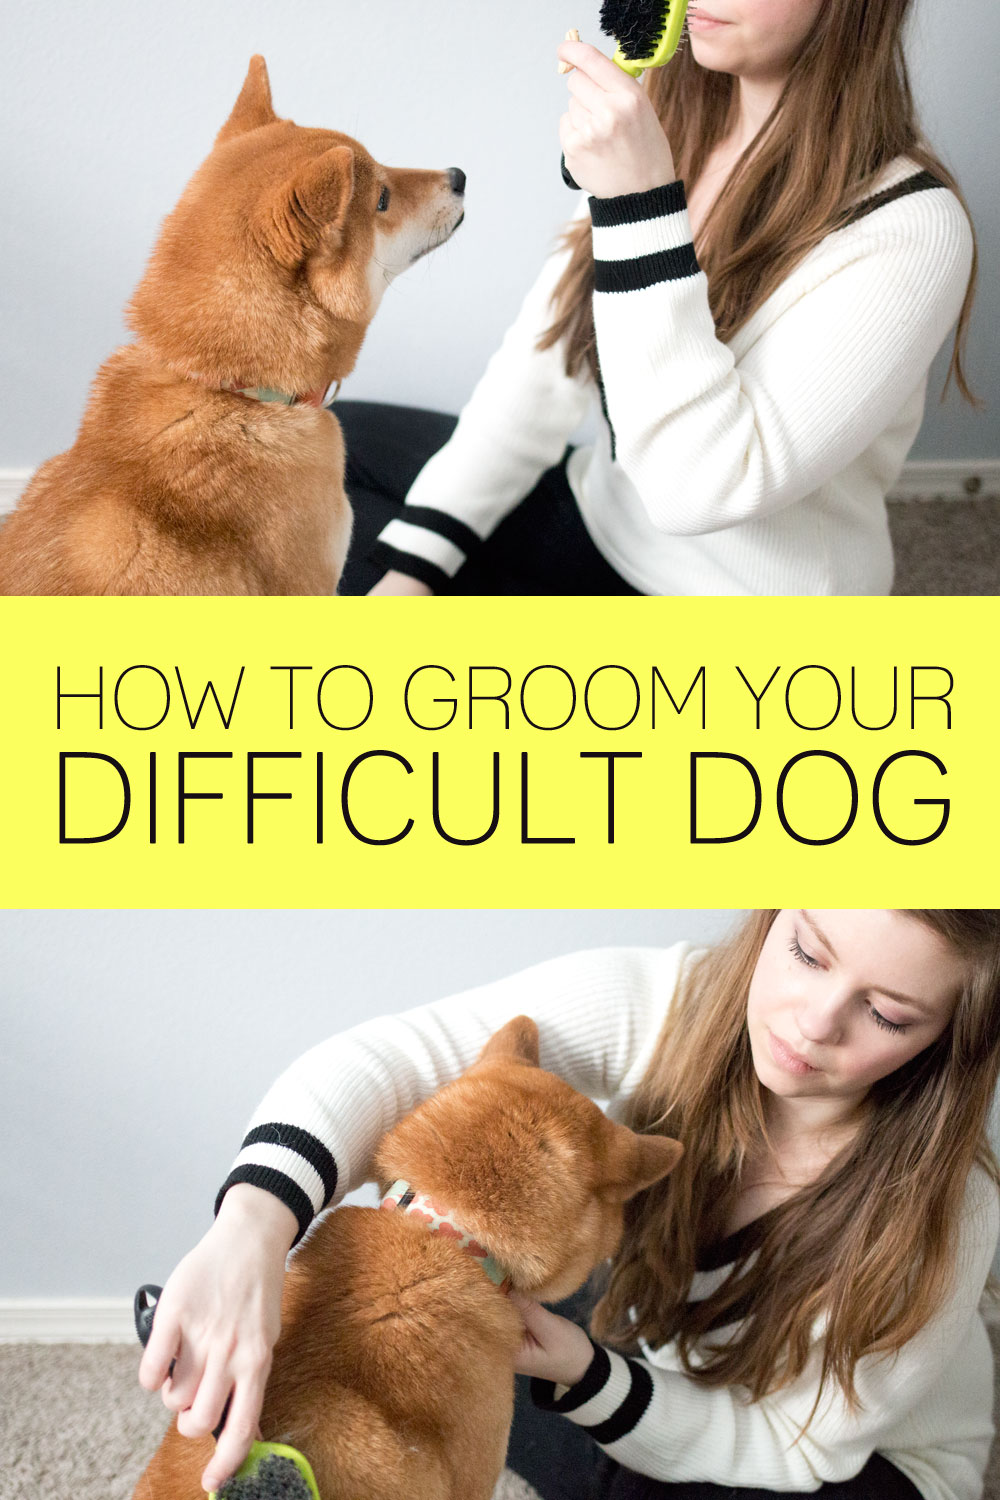 Best Dog Grooming For Difficult Dogs of all time Check it out now 